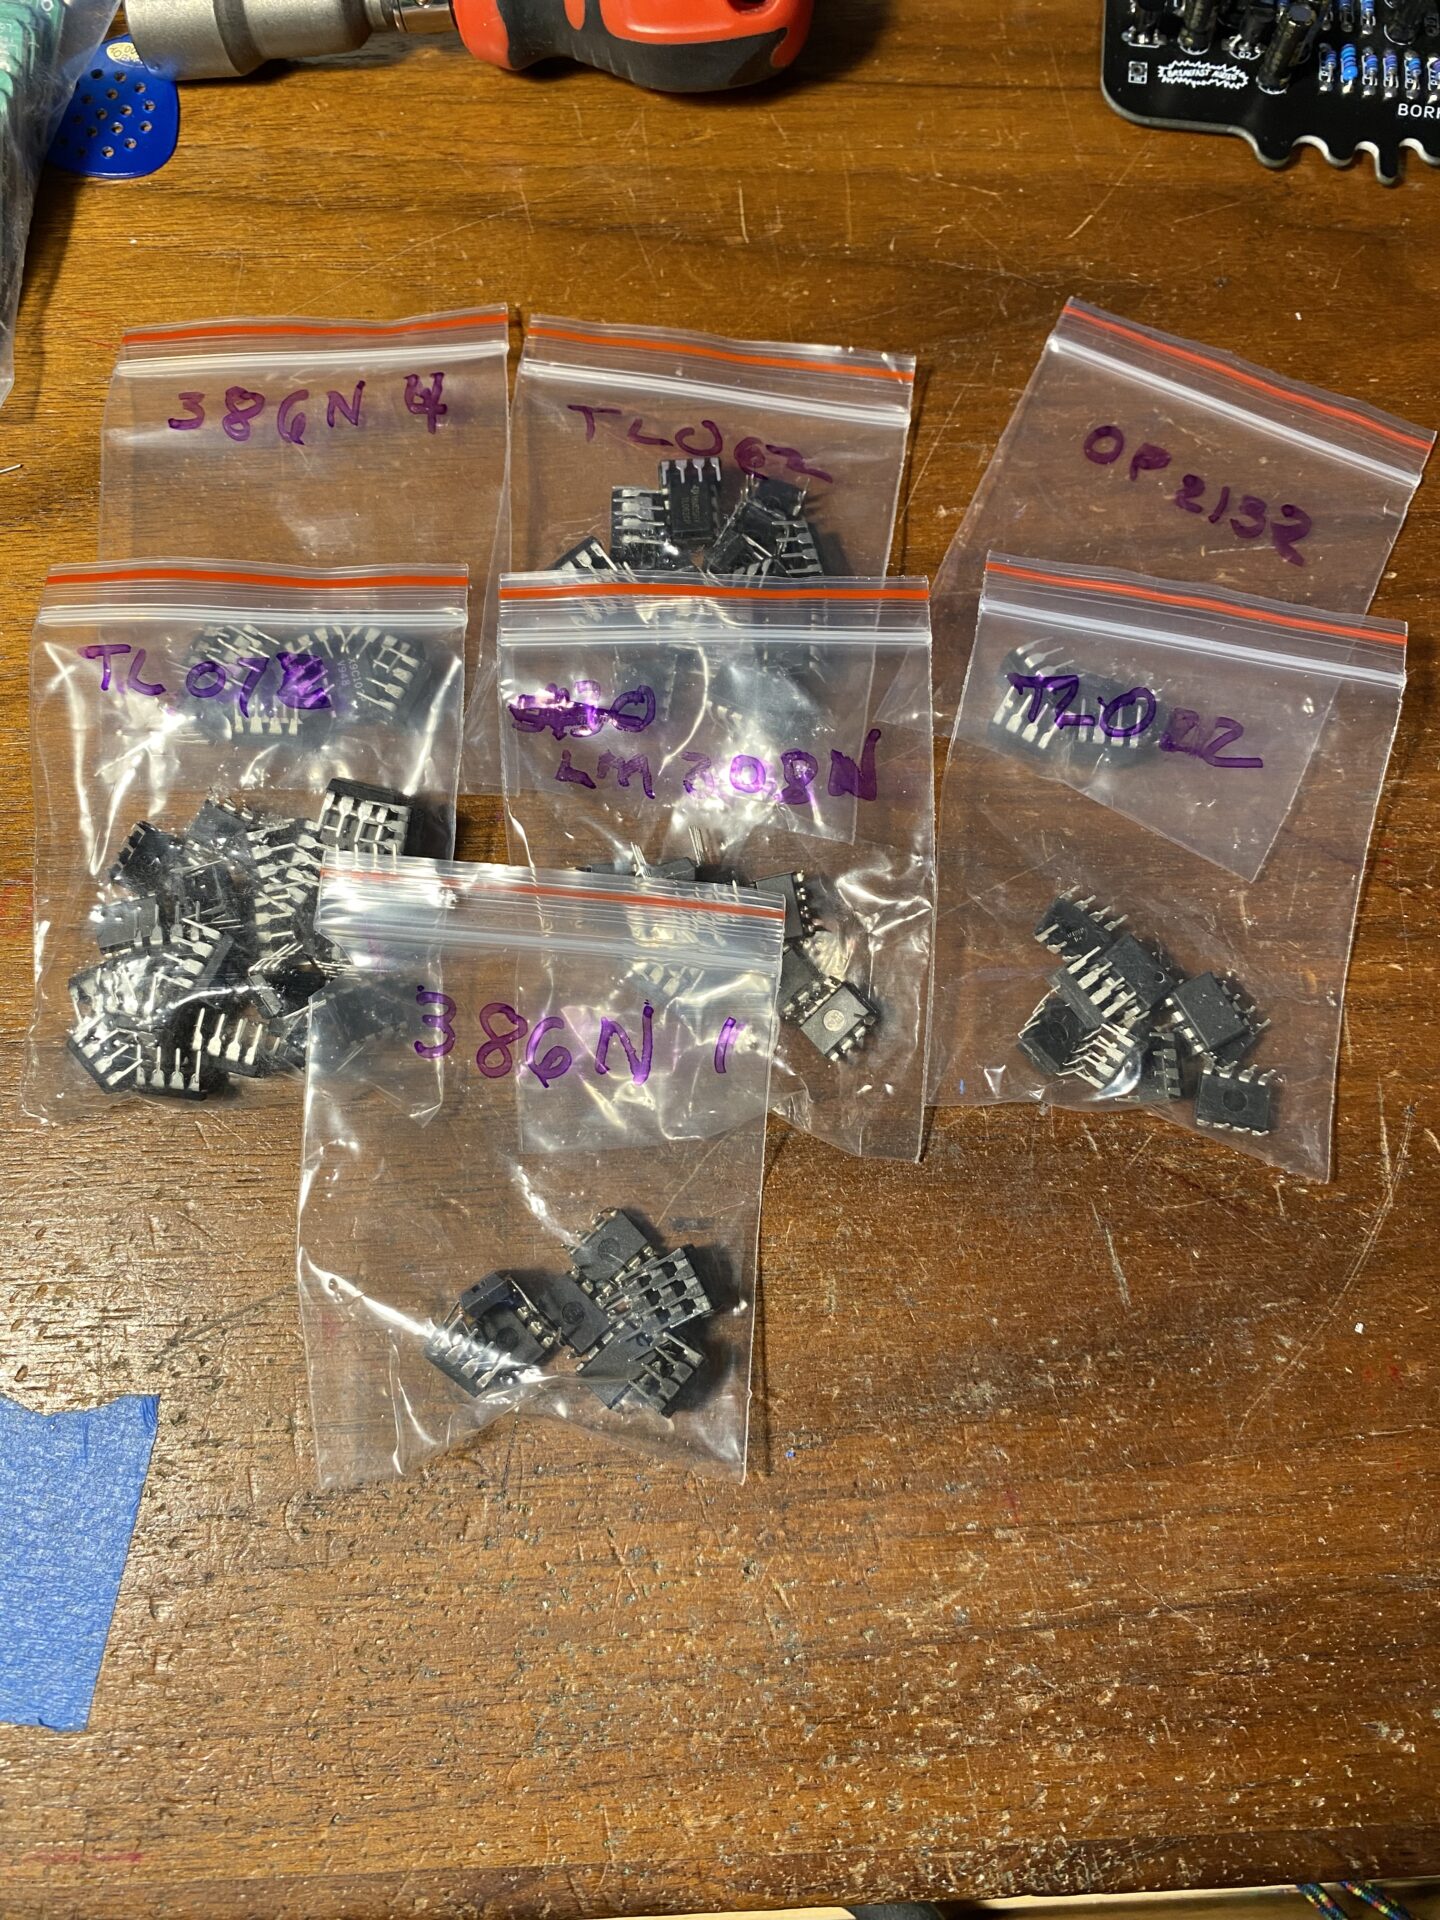 Cheap parts from Aliexpress.com